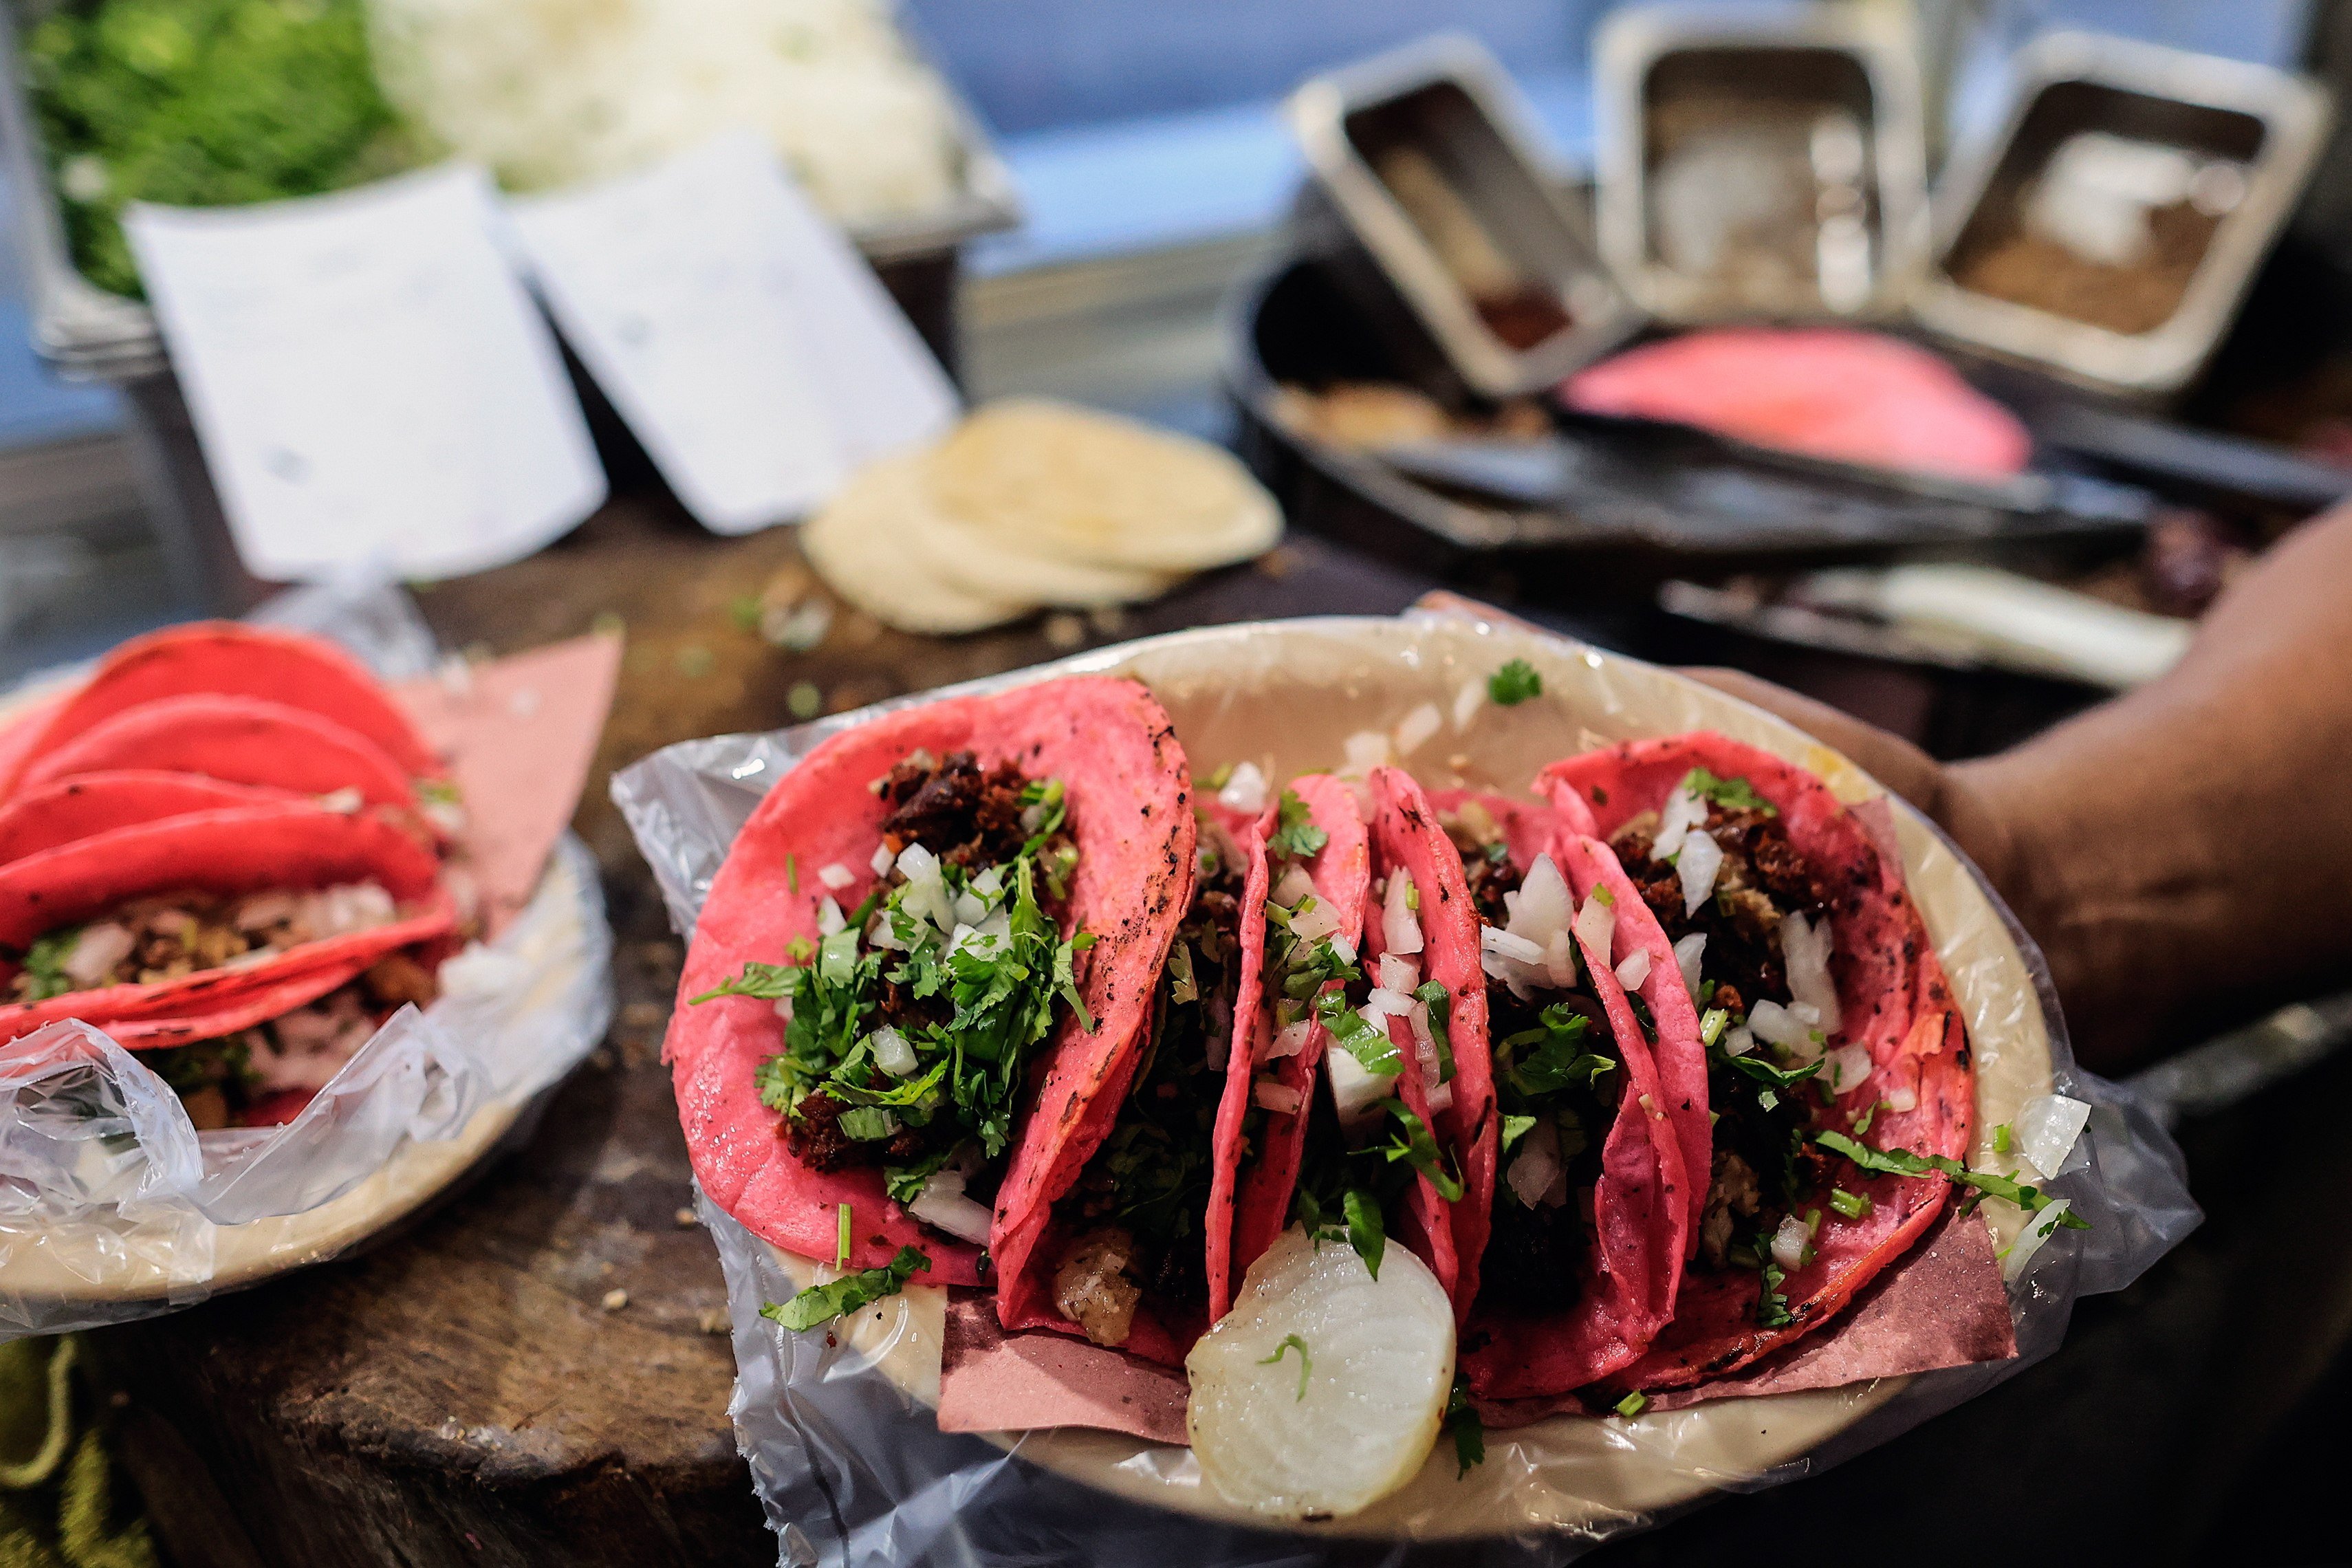 A plate with “Barbie” style beef tacos at a taco shop in Acapulco, Guerrero, Mexico. Photo: EPA-EFE